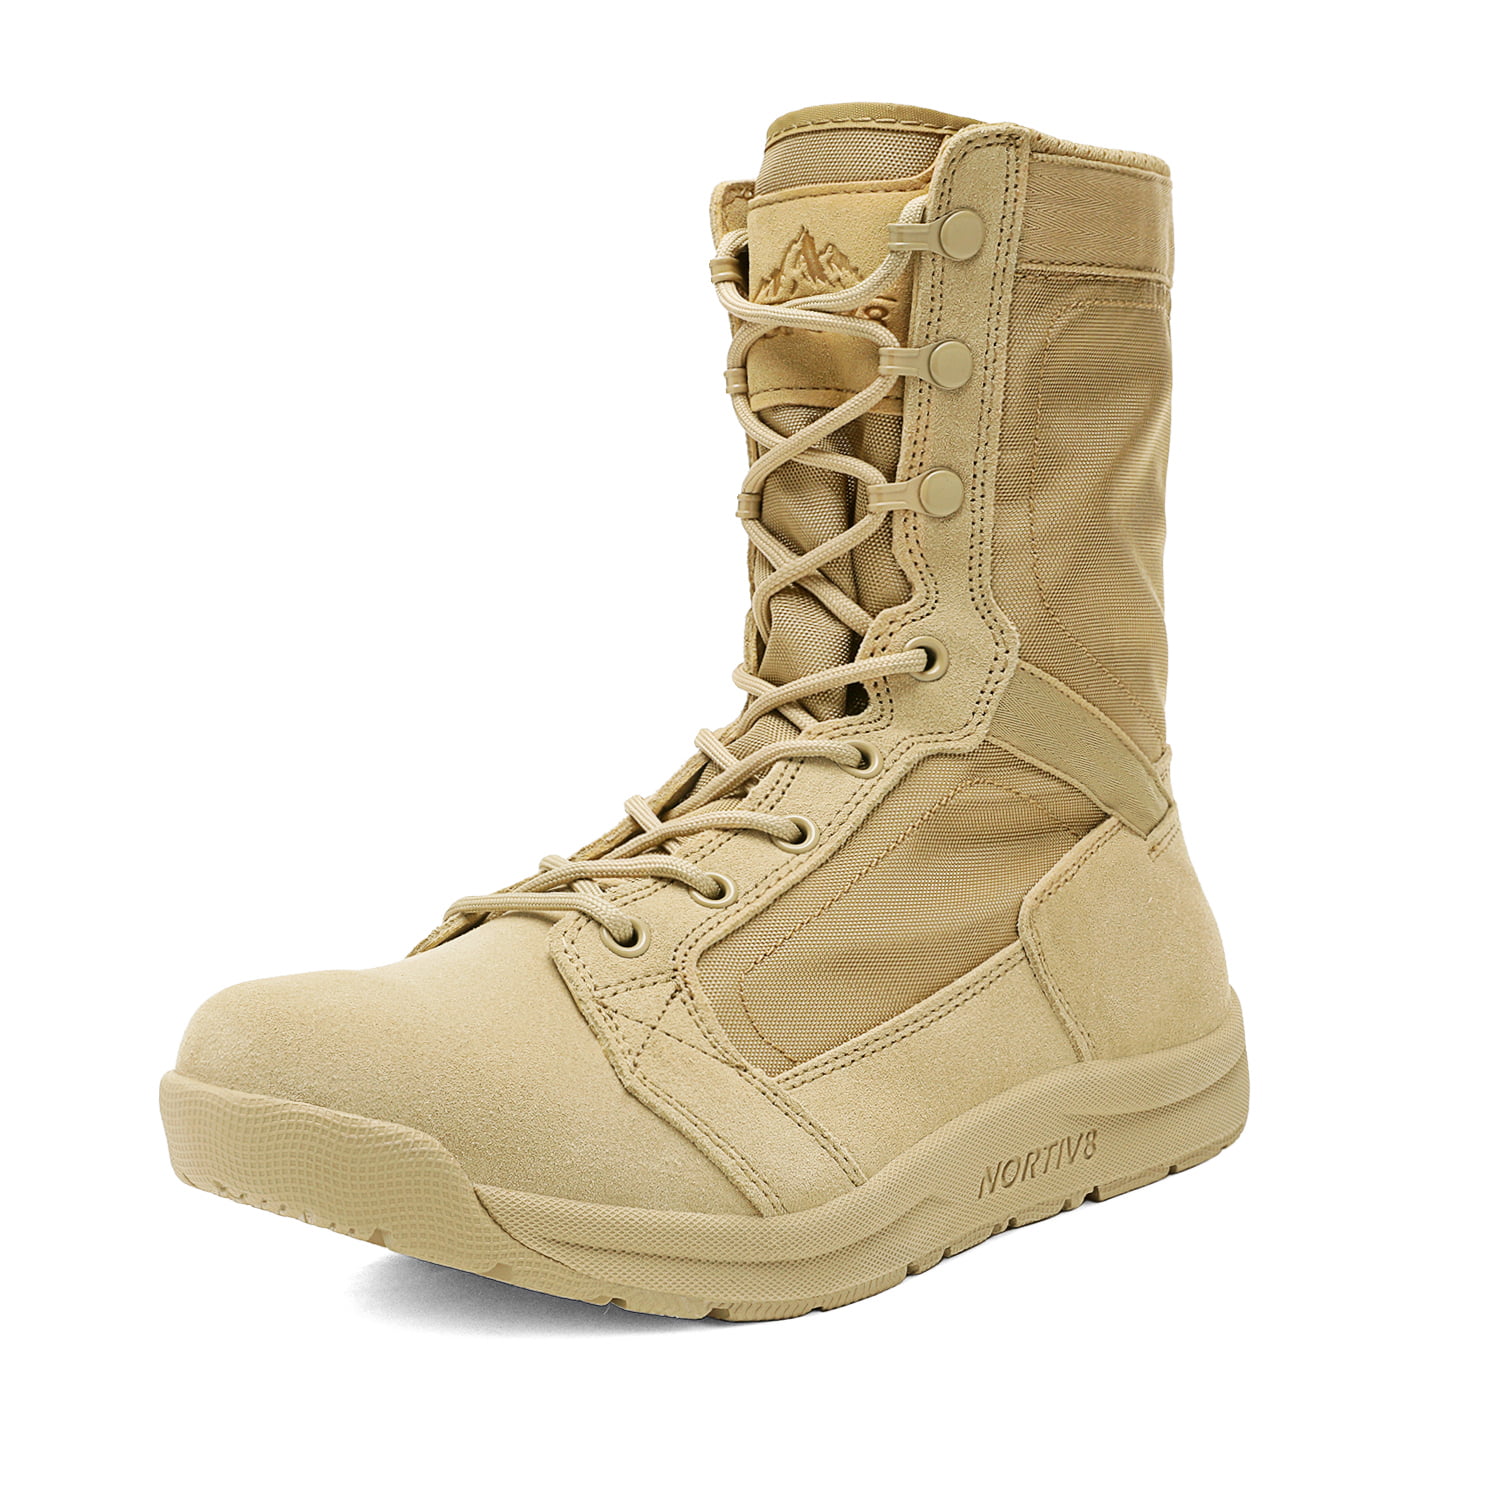 NORTIV 8 Mens Military Tactical Boots Lightweight Jungle Boots 